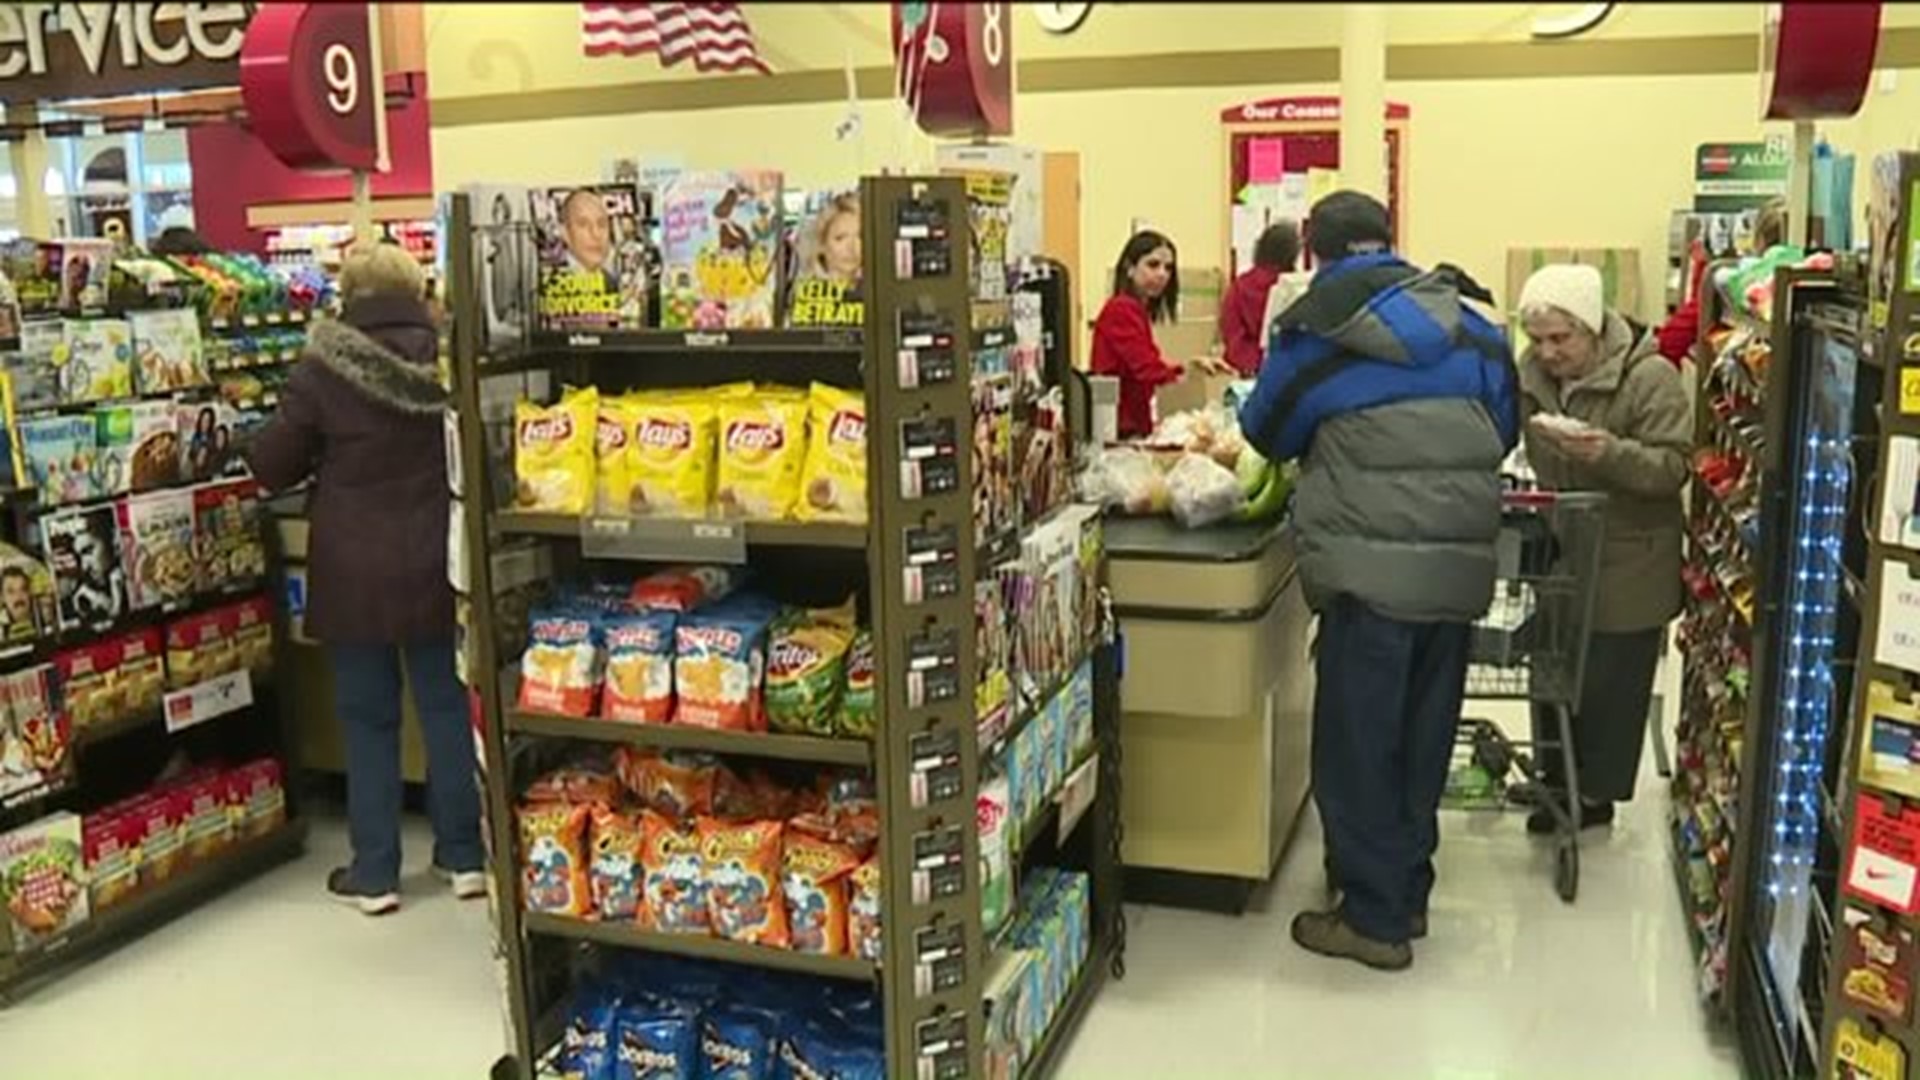 In Schuylkill County, Stores and Workers are Ready for Snow